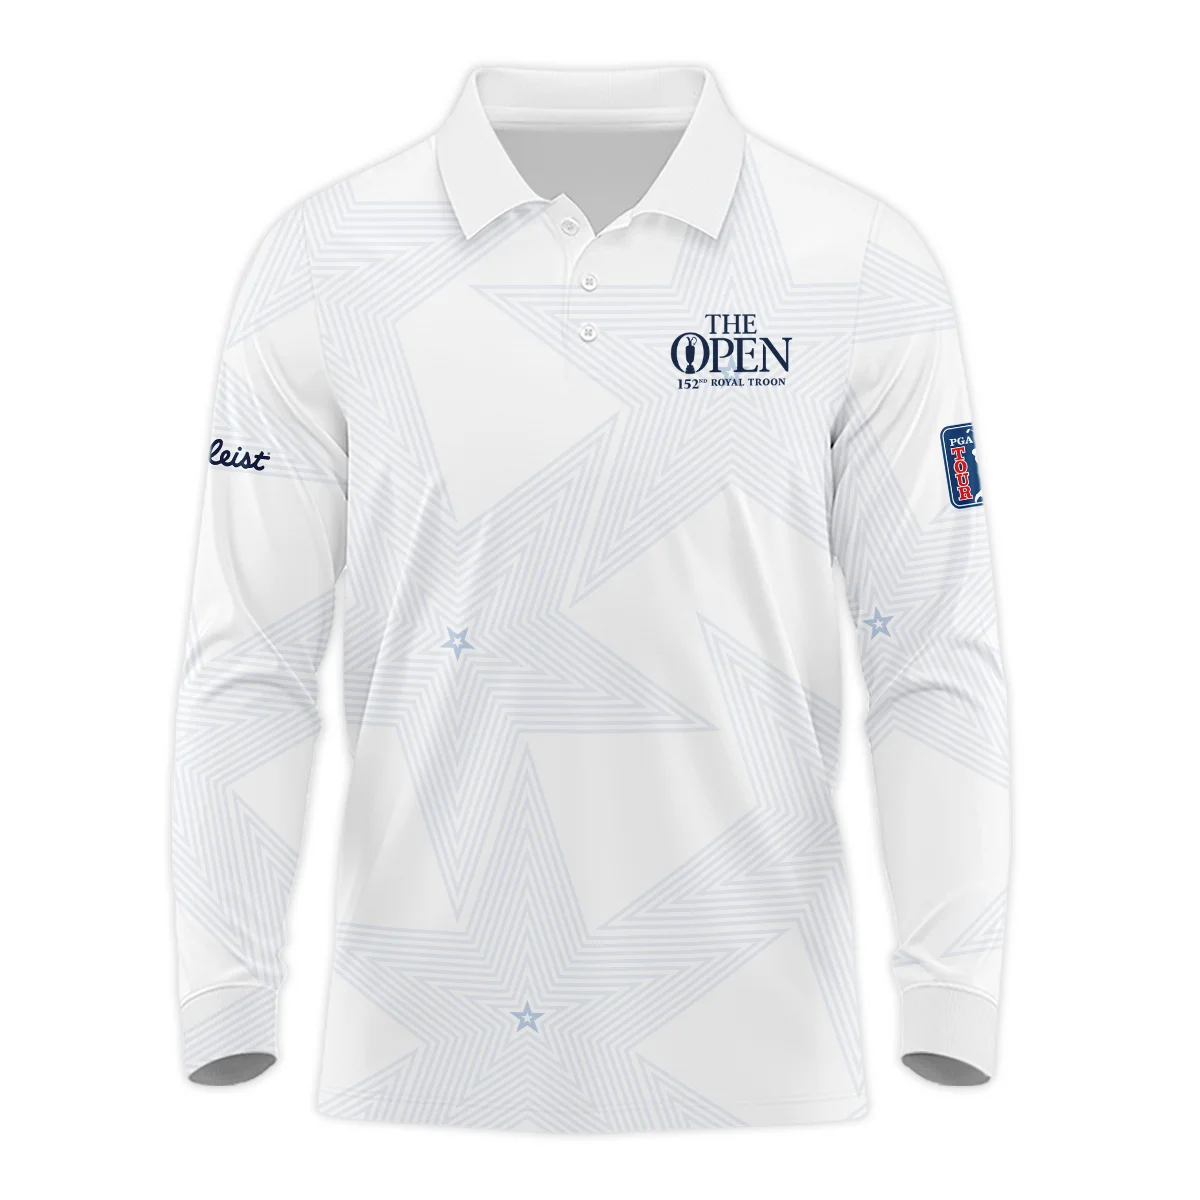 152nd The Open Championship Golf Titleist Long Polo Shirt Stars White Navy Golf Sports All Over Print Long Polo Shirt For Men